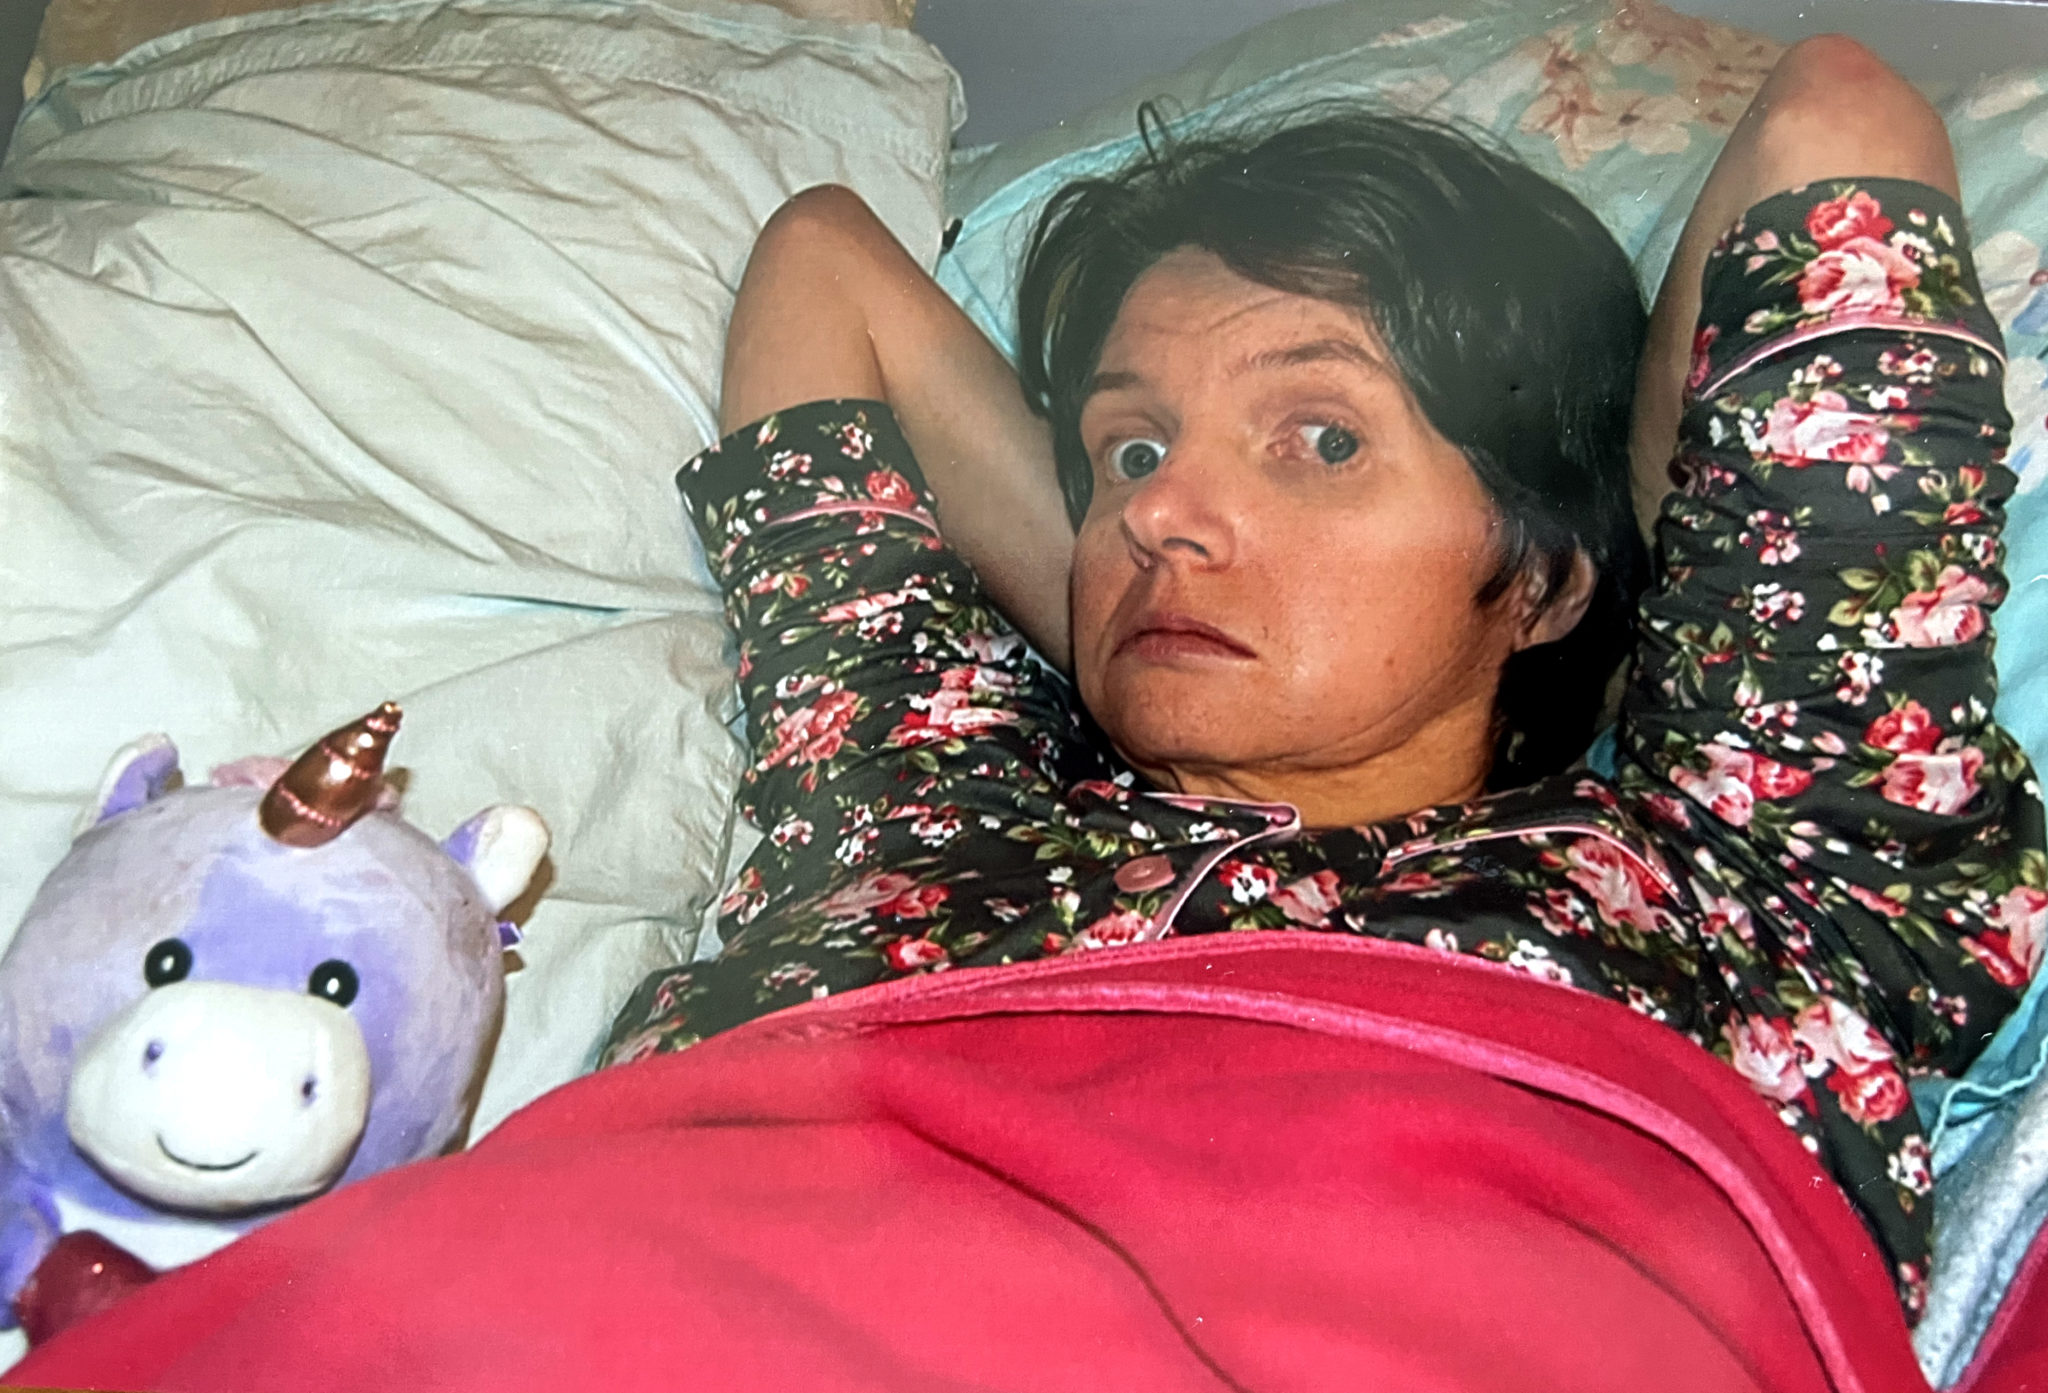 Woman in dark floral pajamas is tucked into bed with purple stuffed animal unicorn.